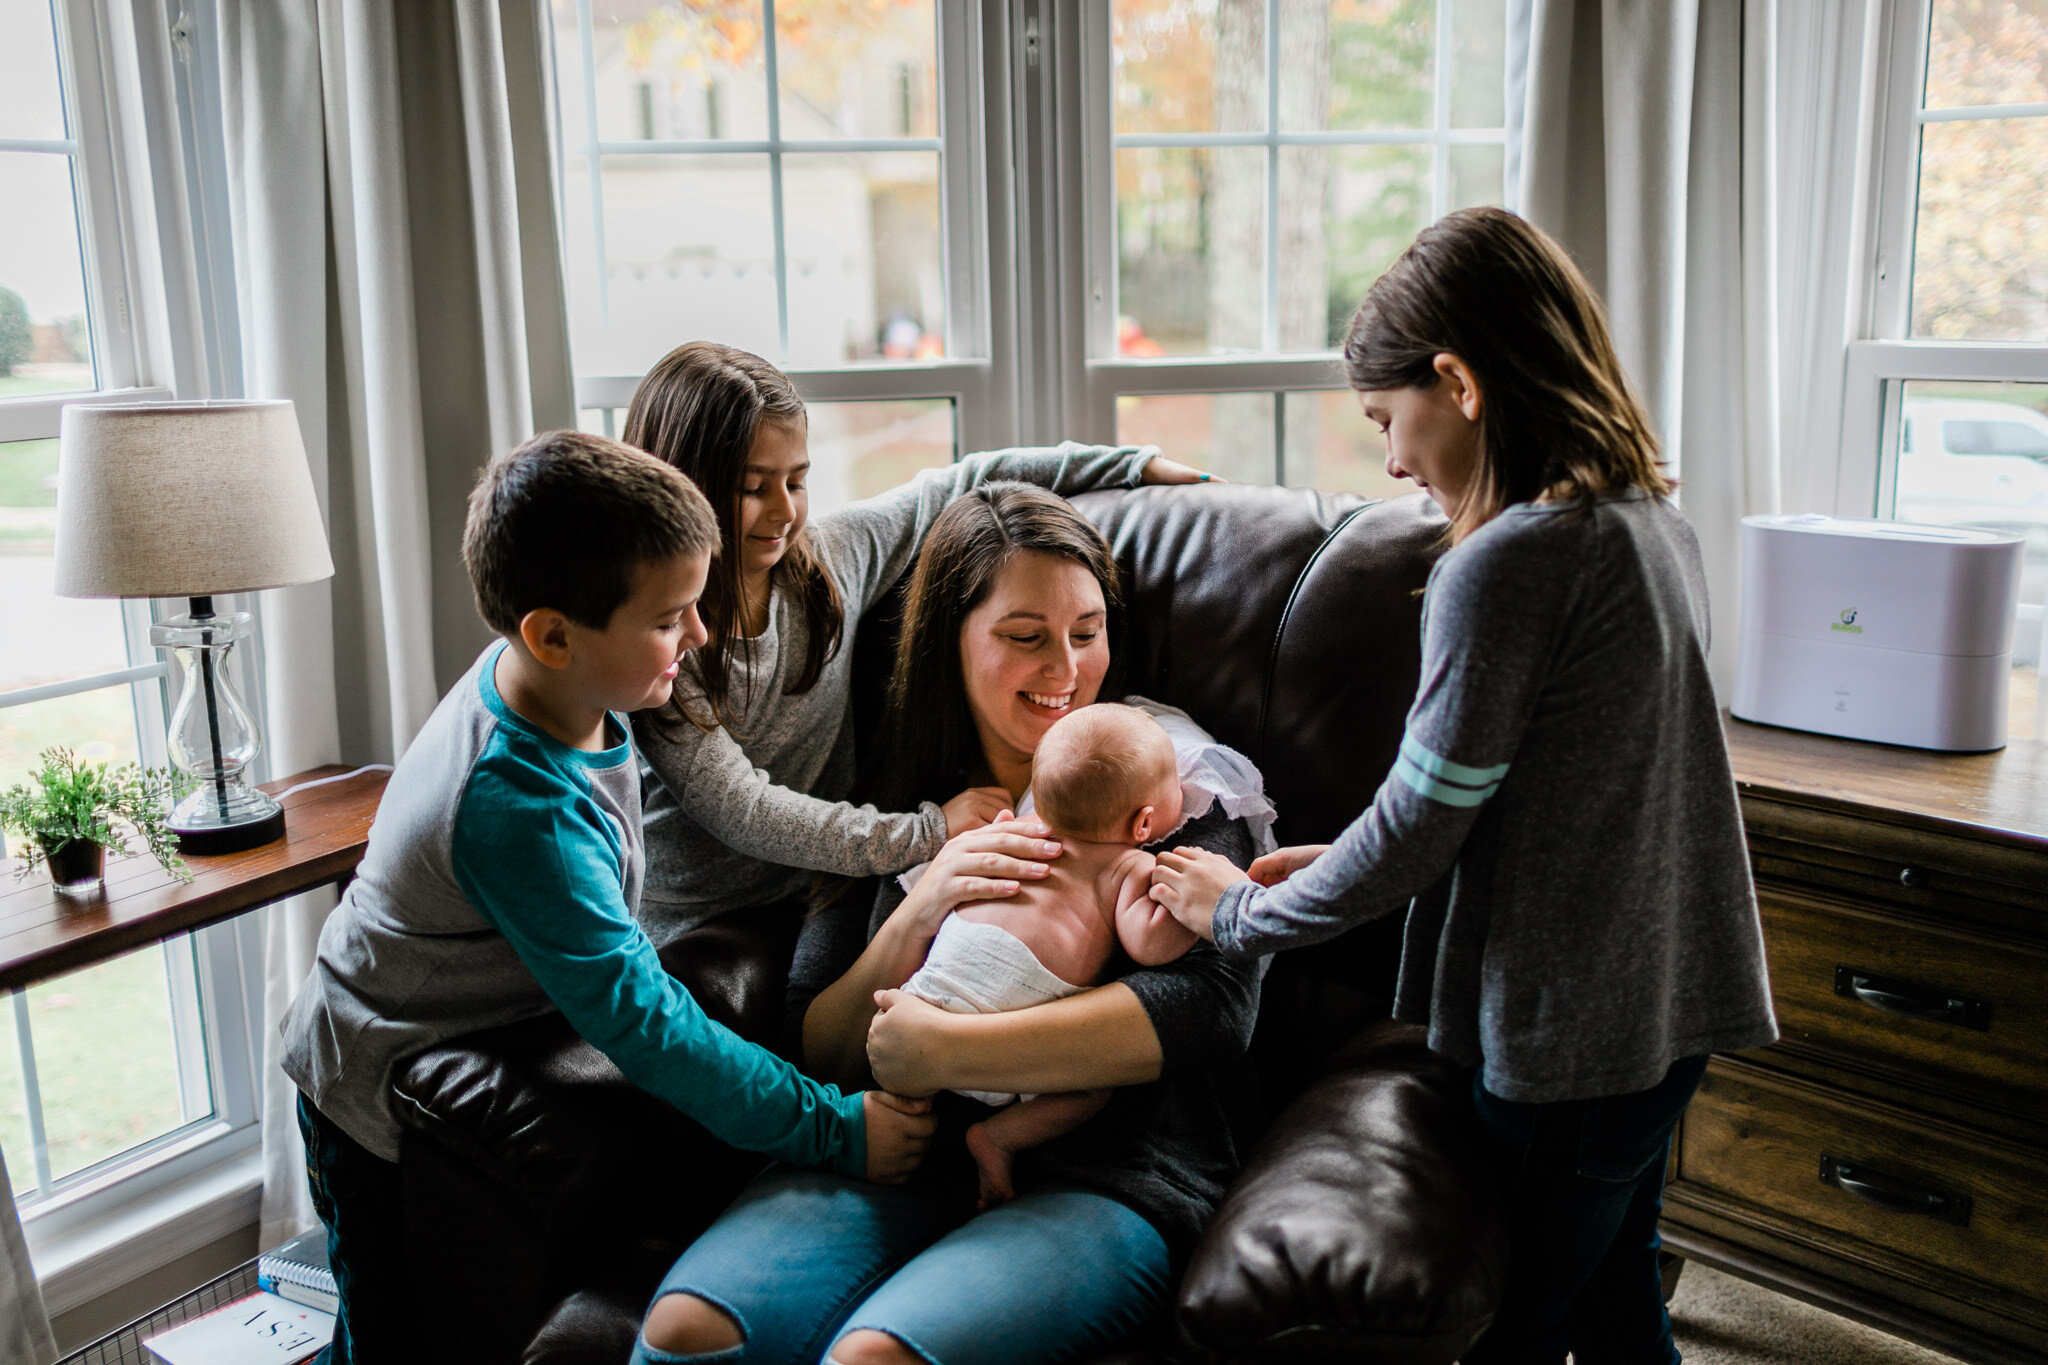 Raleigh Newborn Photographer | By G. Lin Photography | Candid photo of siblings and mother next to window